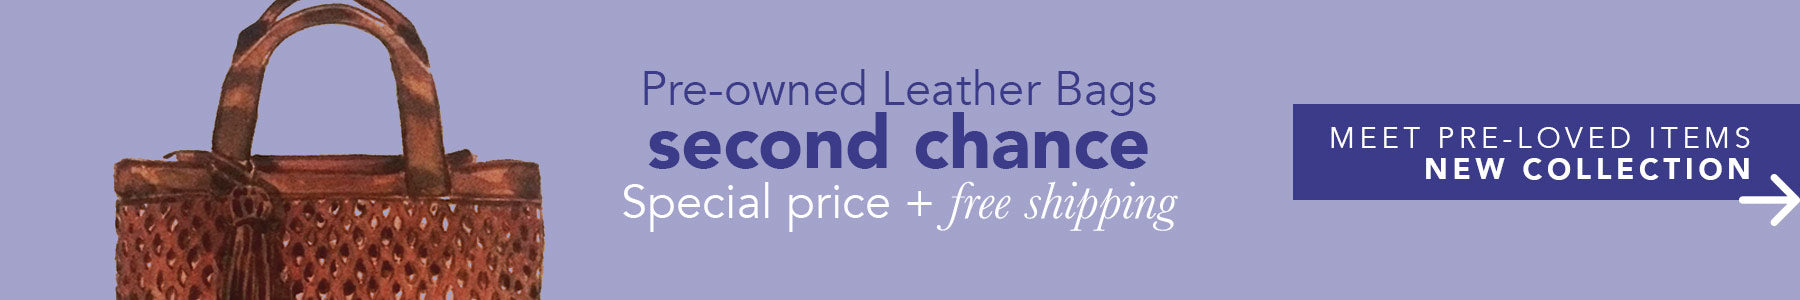 reduce waste with second chance leather bags